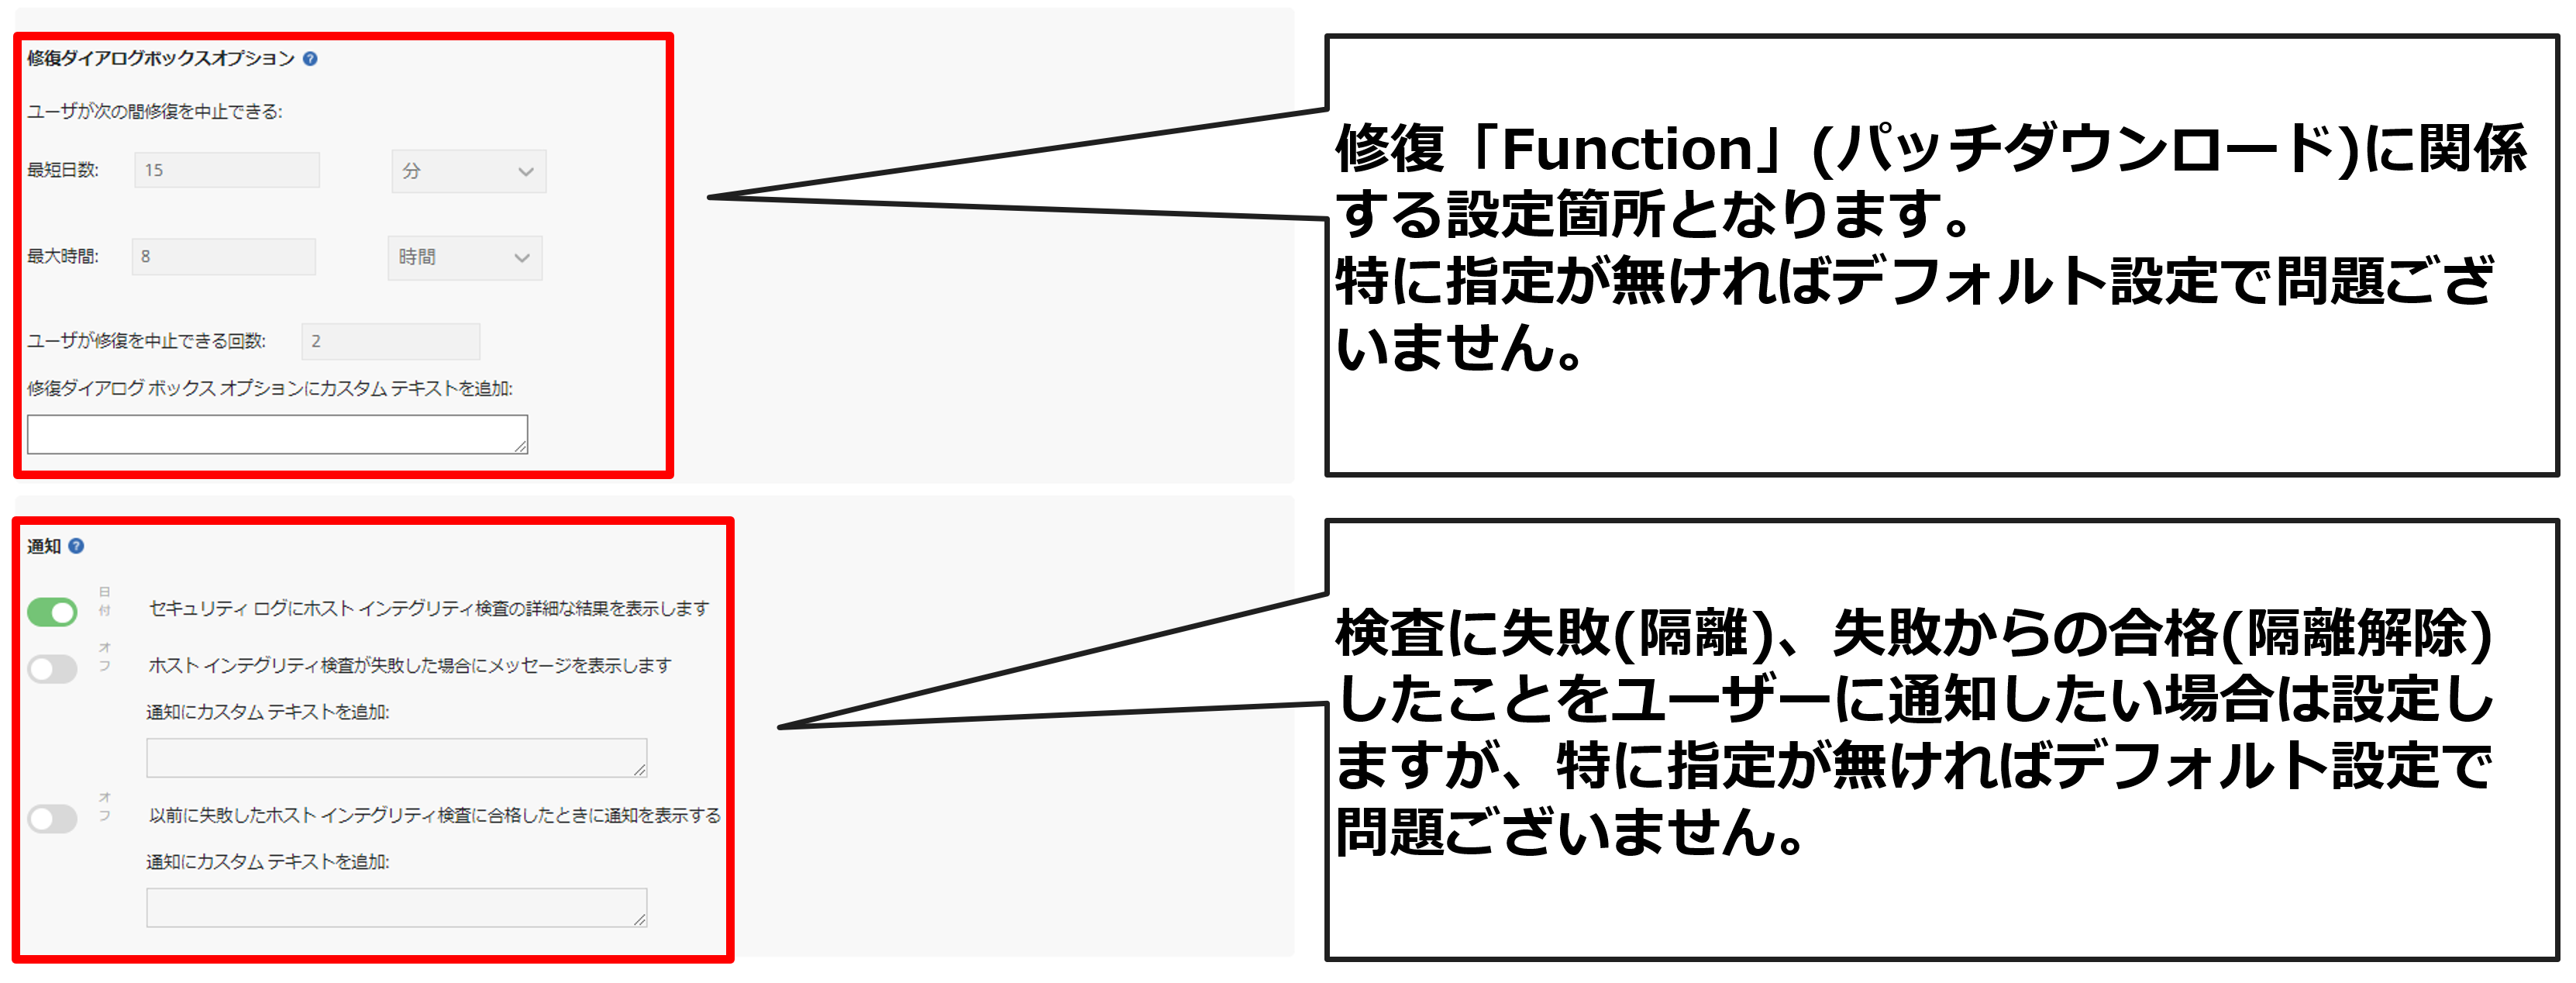 https://licensecounter.jp/engineer-voice/blog/uploads/c5c8b6177941579a56ba24719263b3aed7e756dc.png